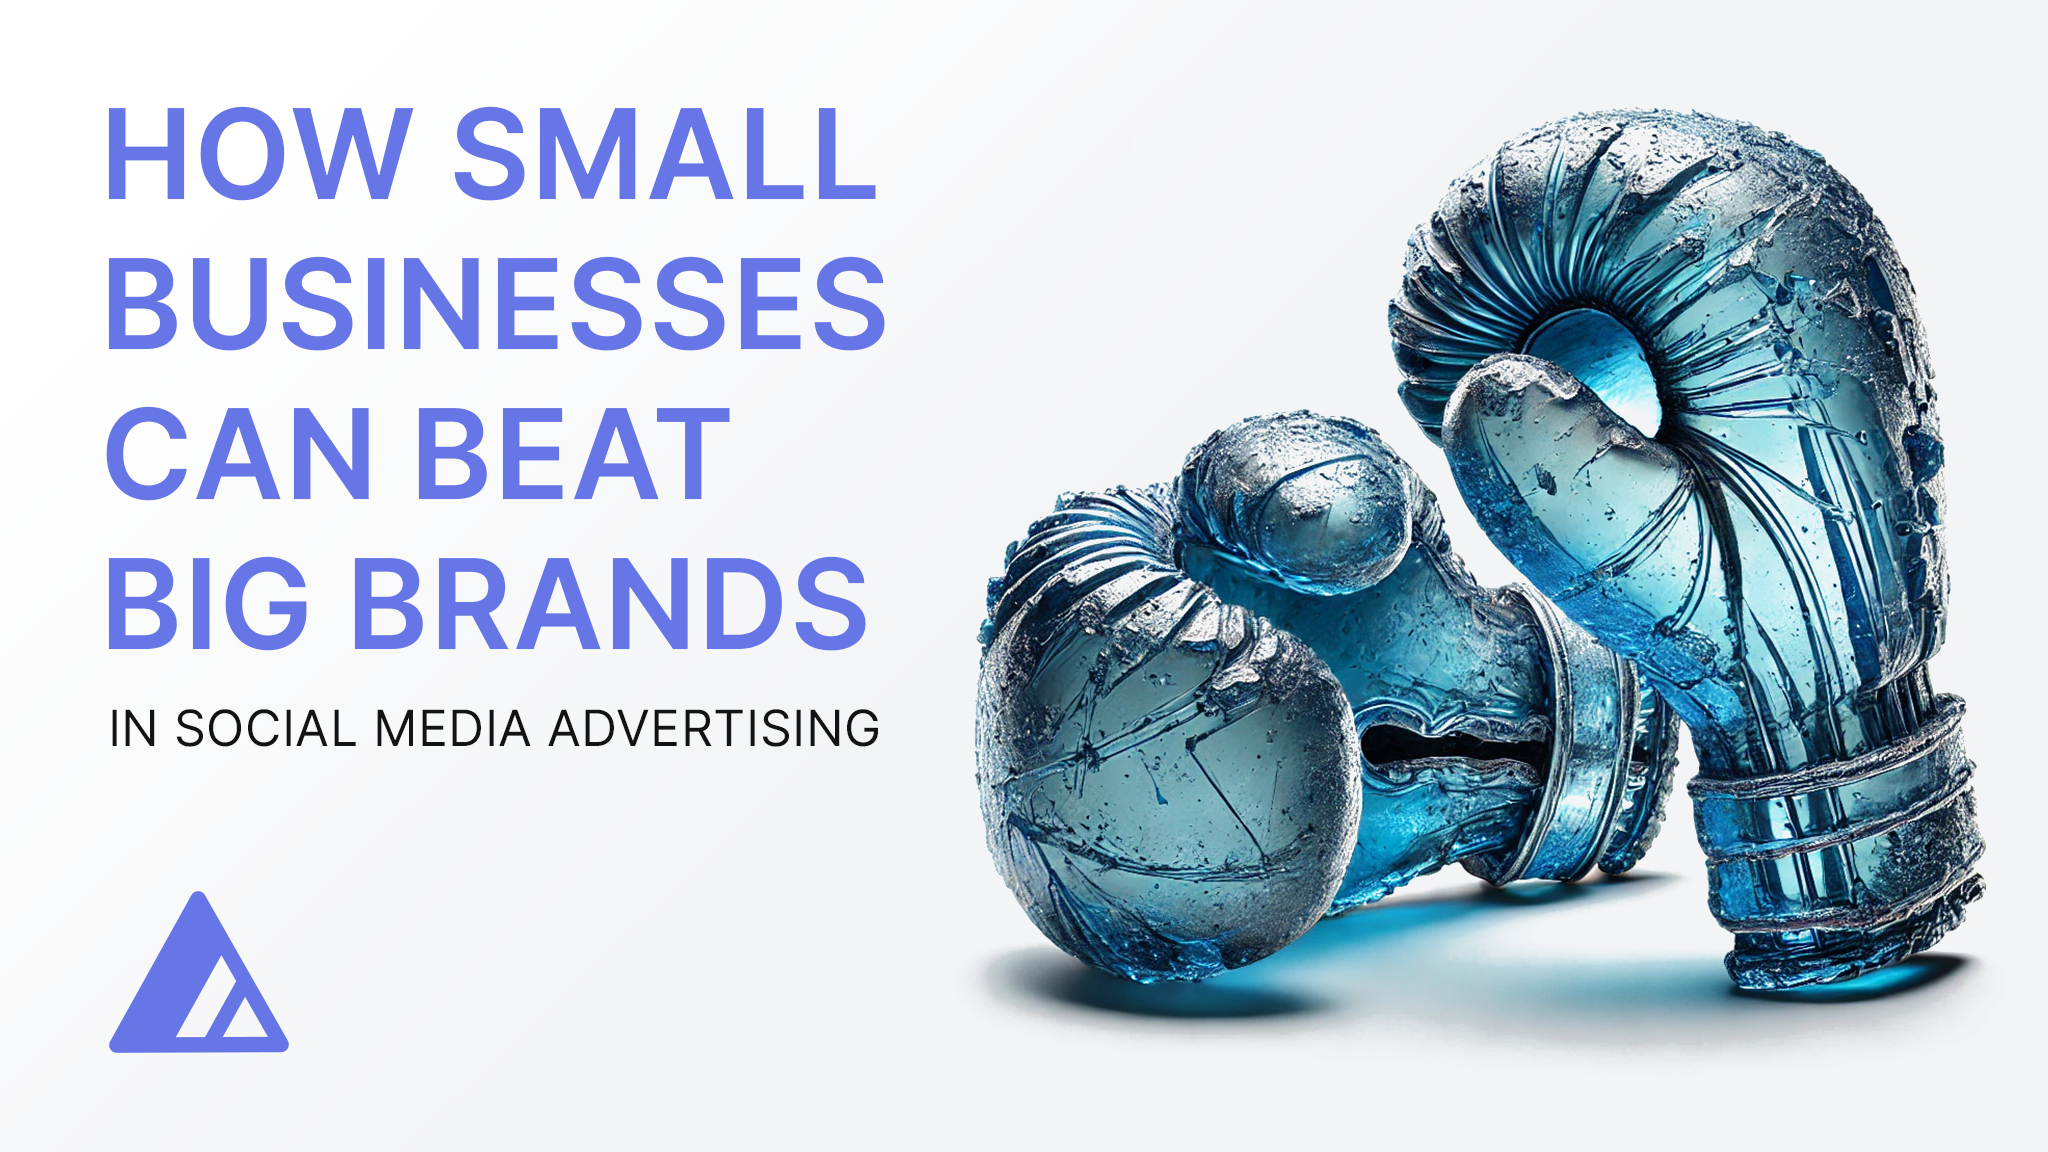 How Small Businesses Can Beat Big Brands in Social Media Advertising